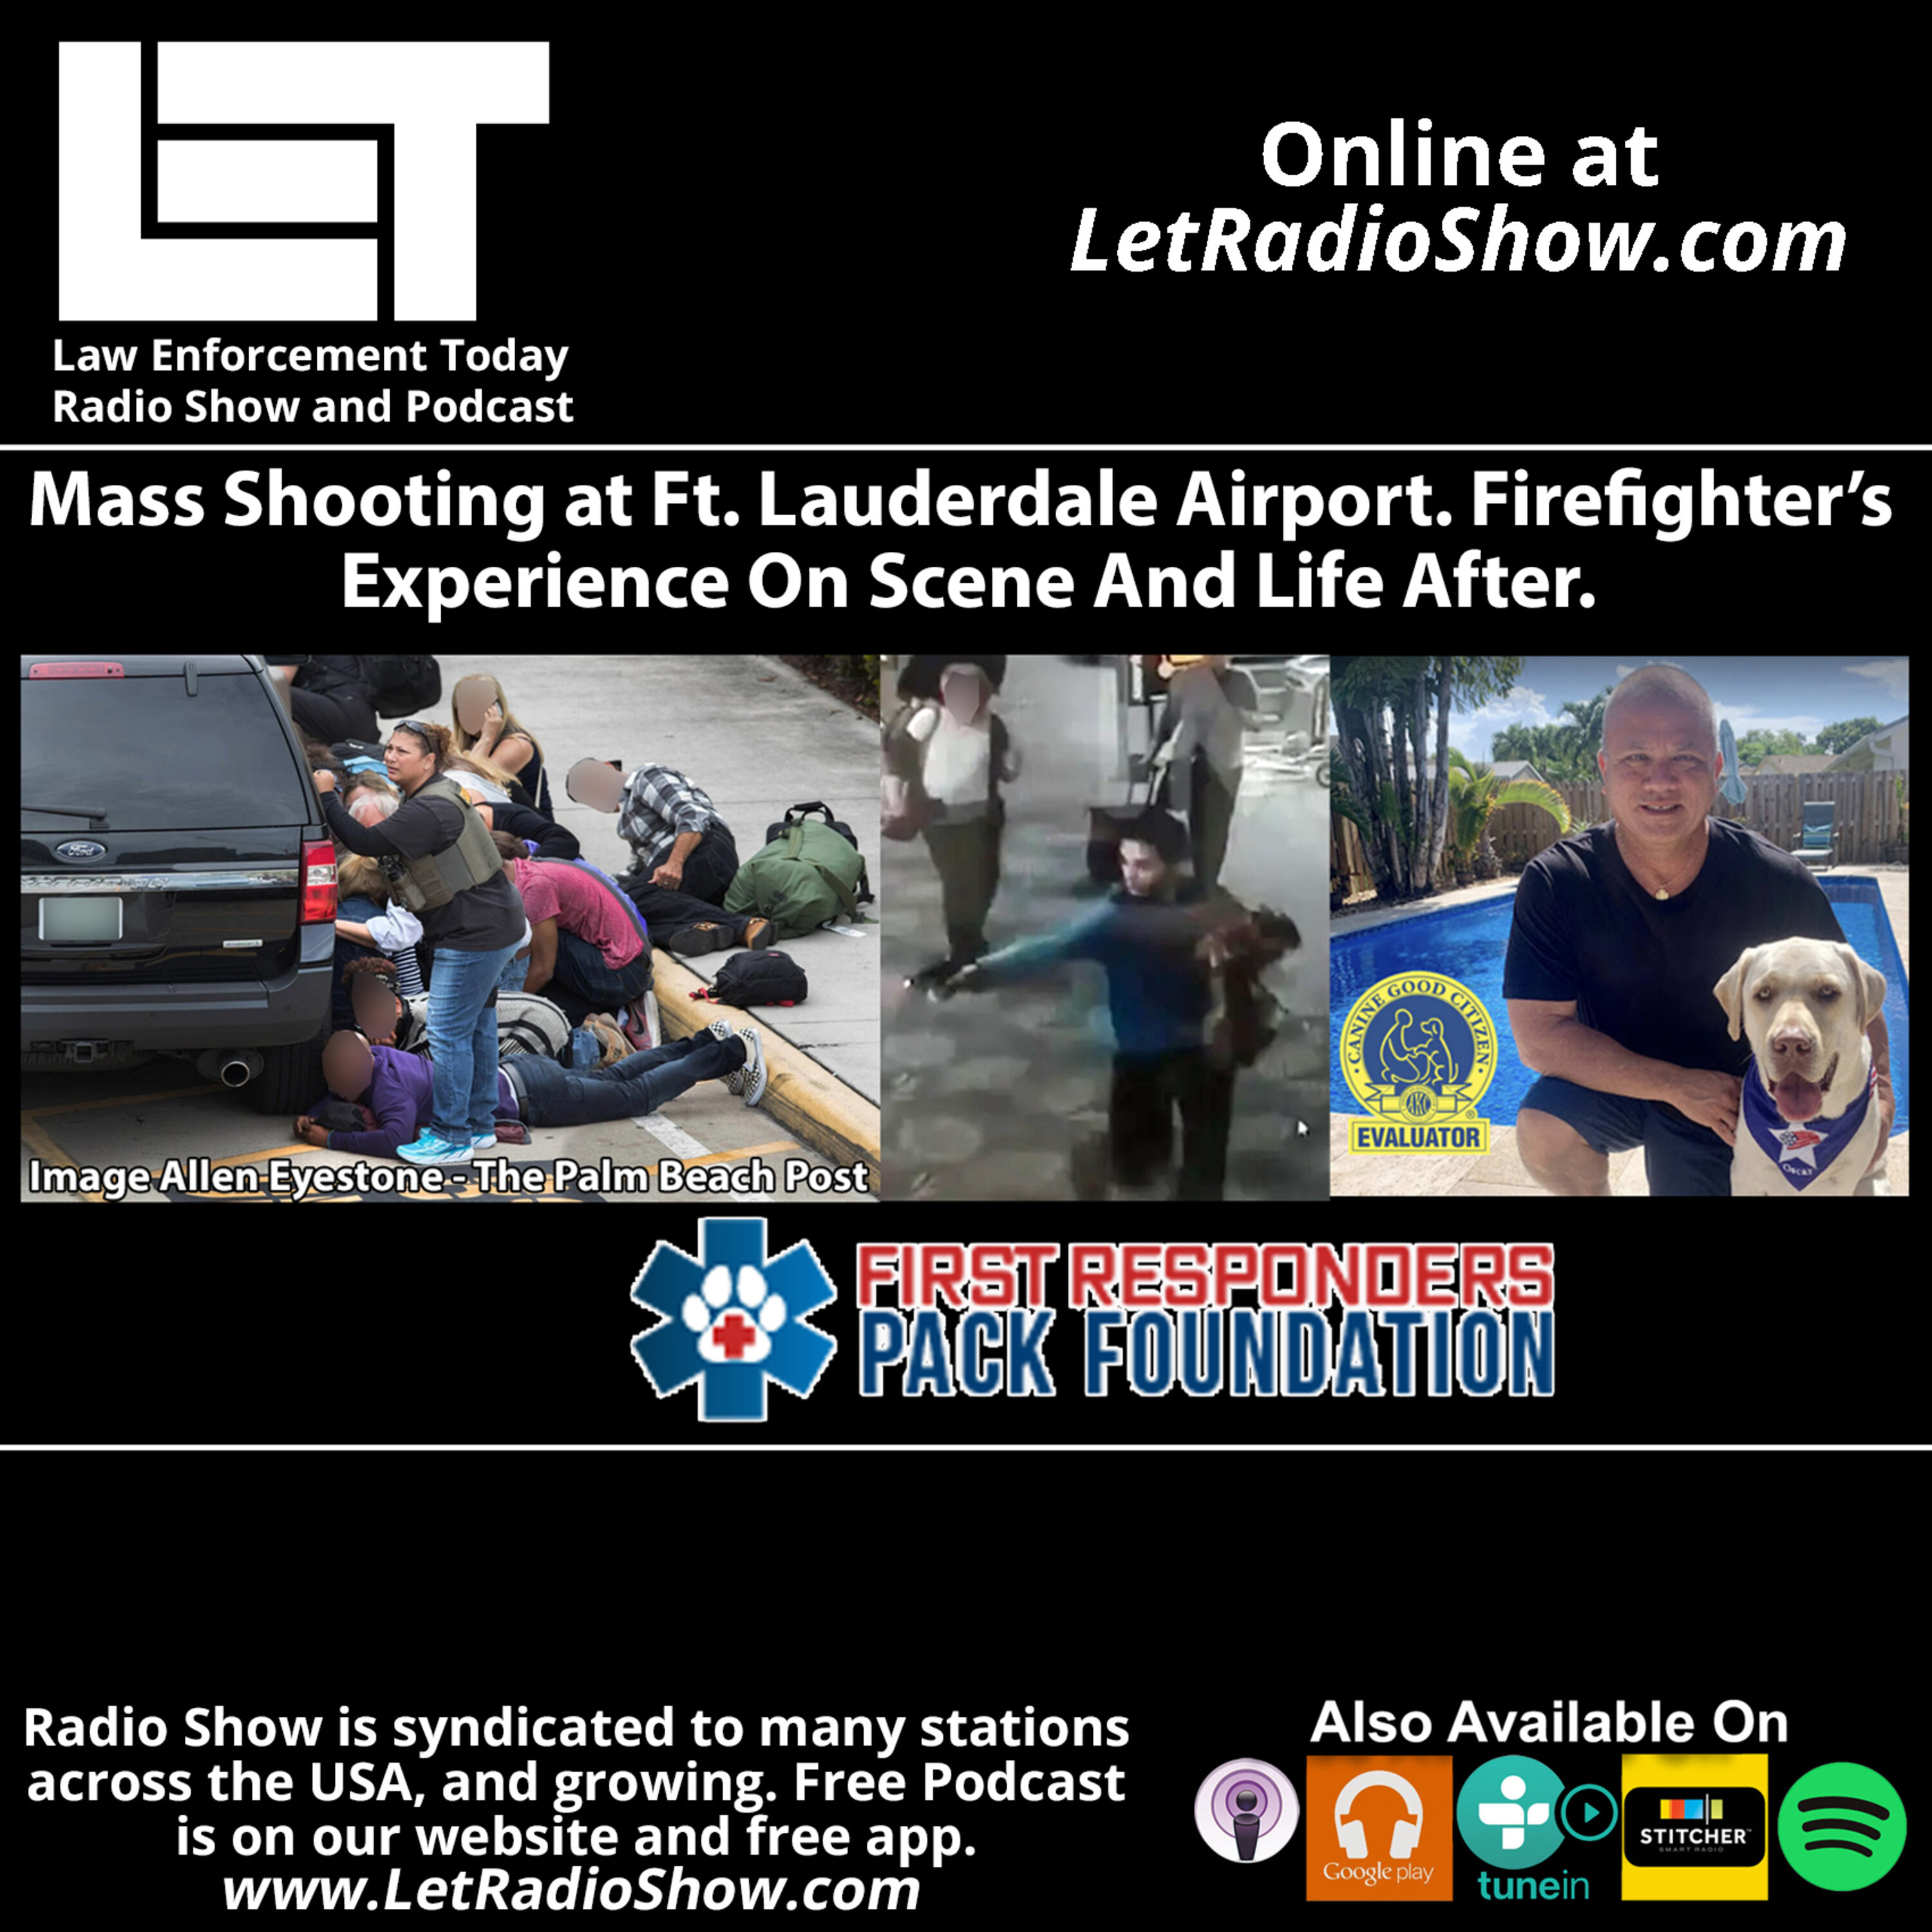 S7E2: Mass Shooting at Ft. Lauderdale Airport. Firefighter’s Experience On Scene And Life After. Image